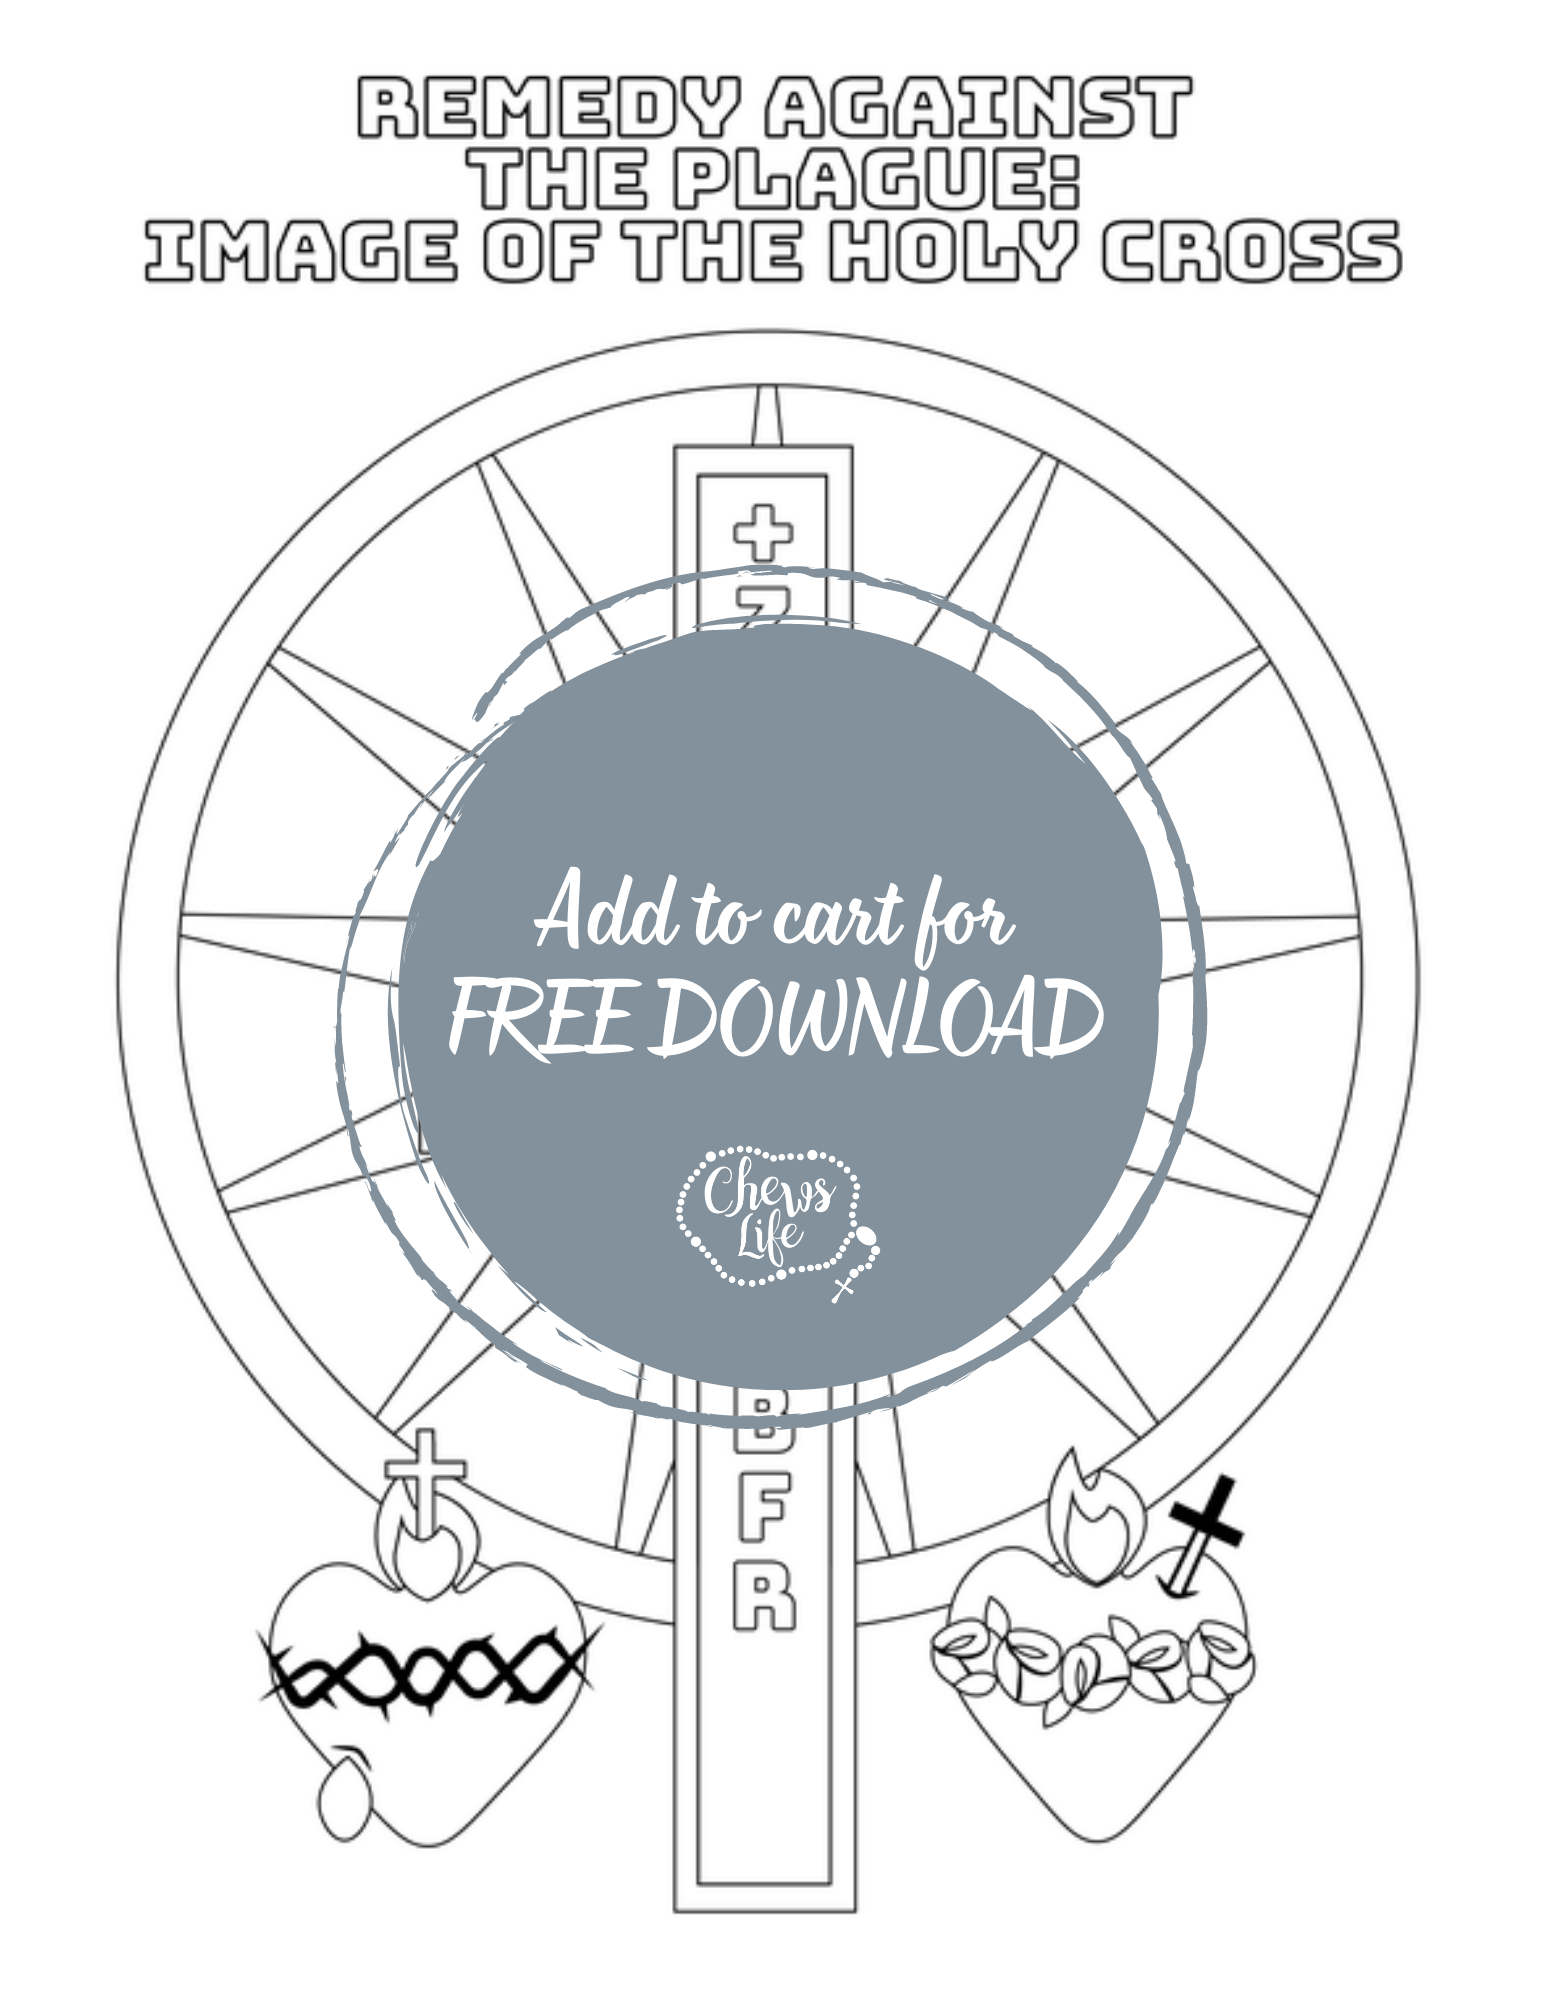 chews-life-image-of-the-holy-cross-remedy-against-the-plague-coloring-page-31349568536752.png